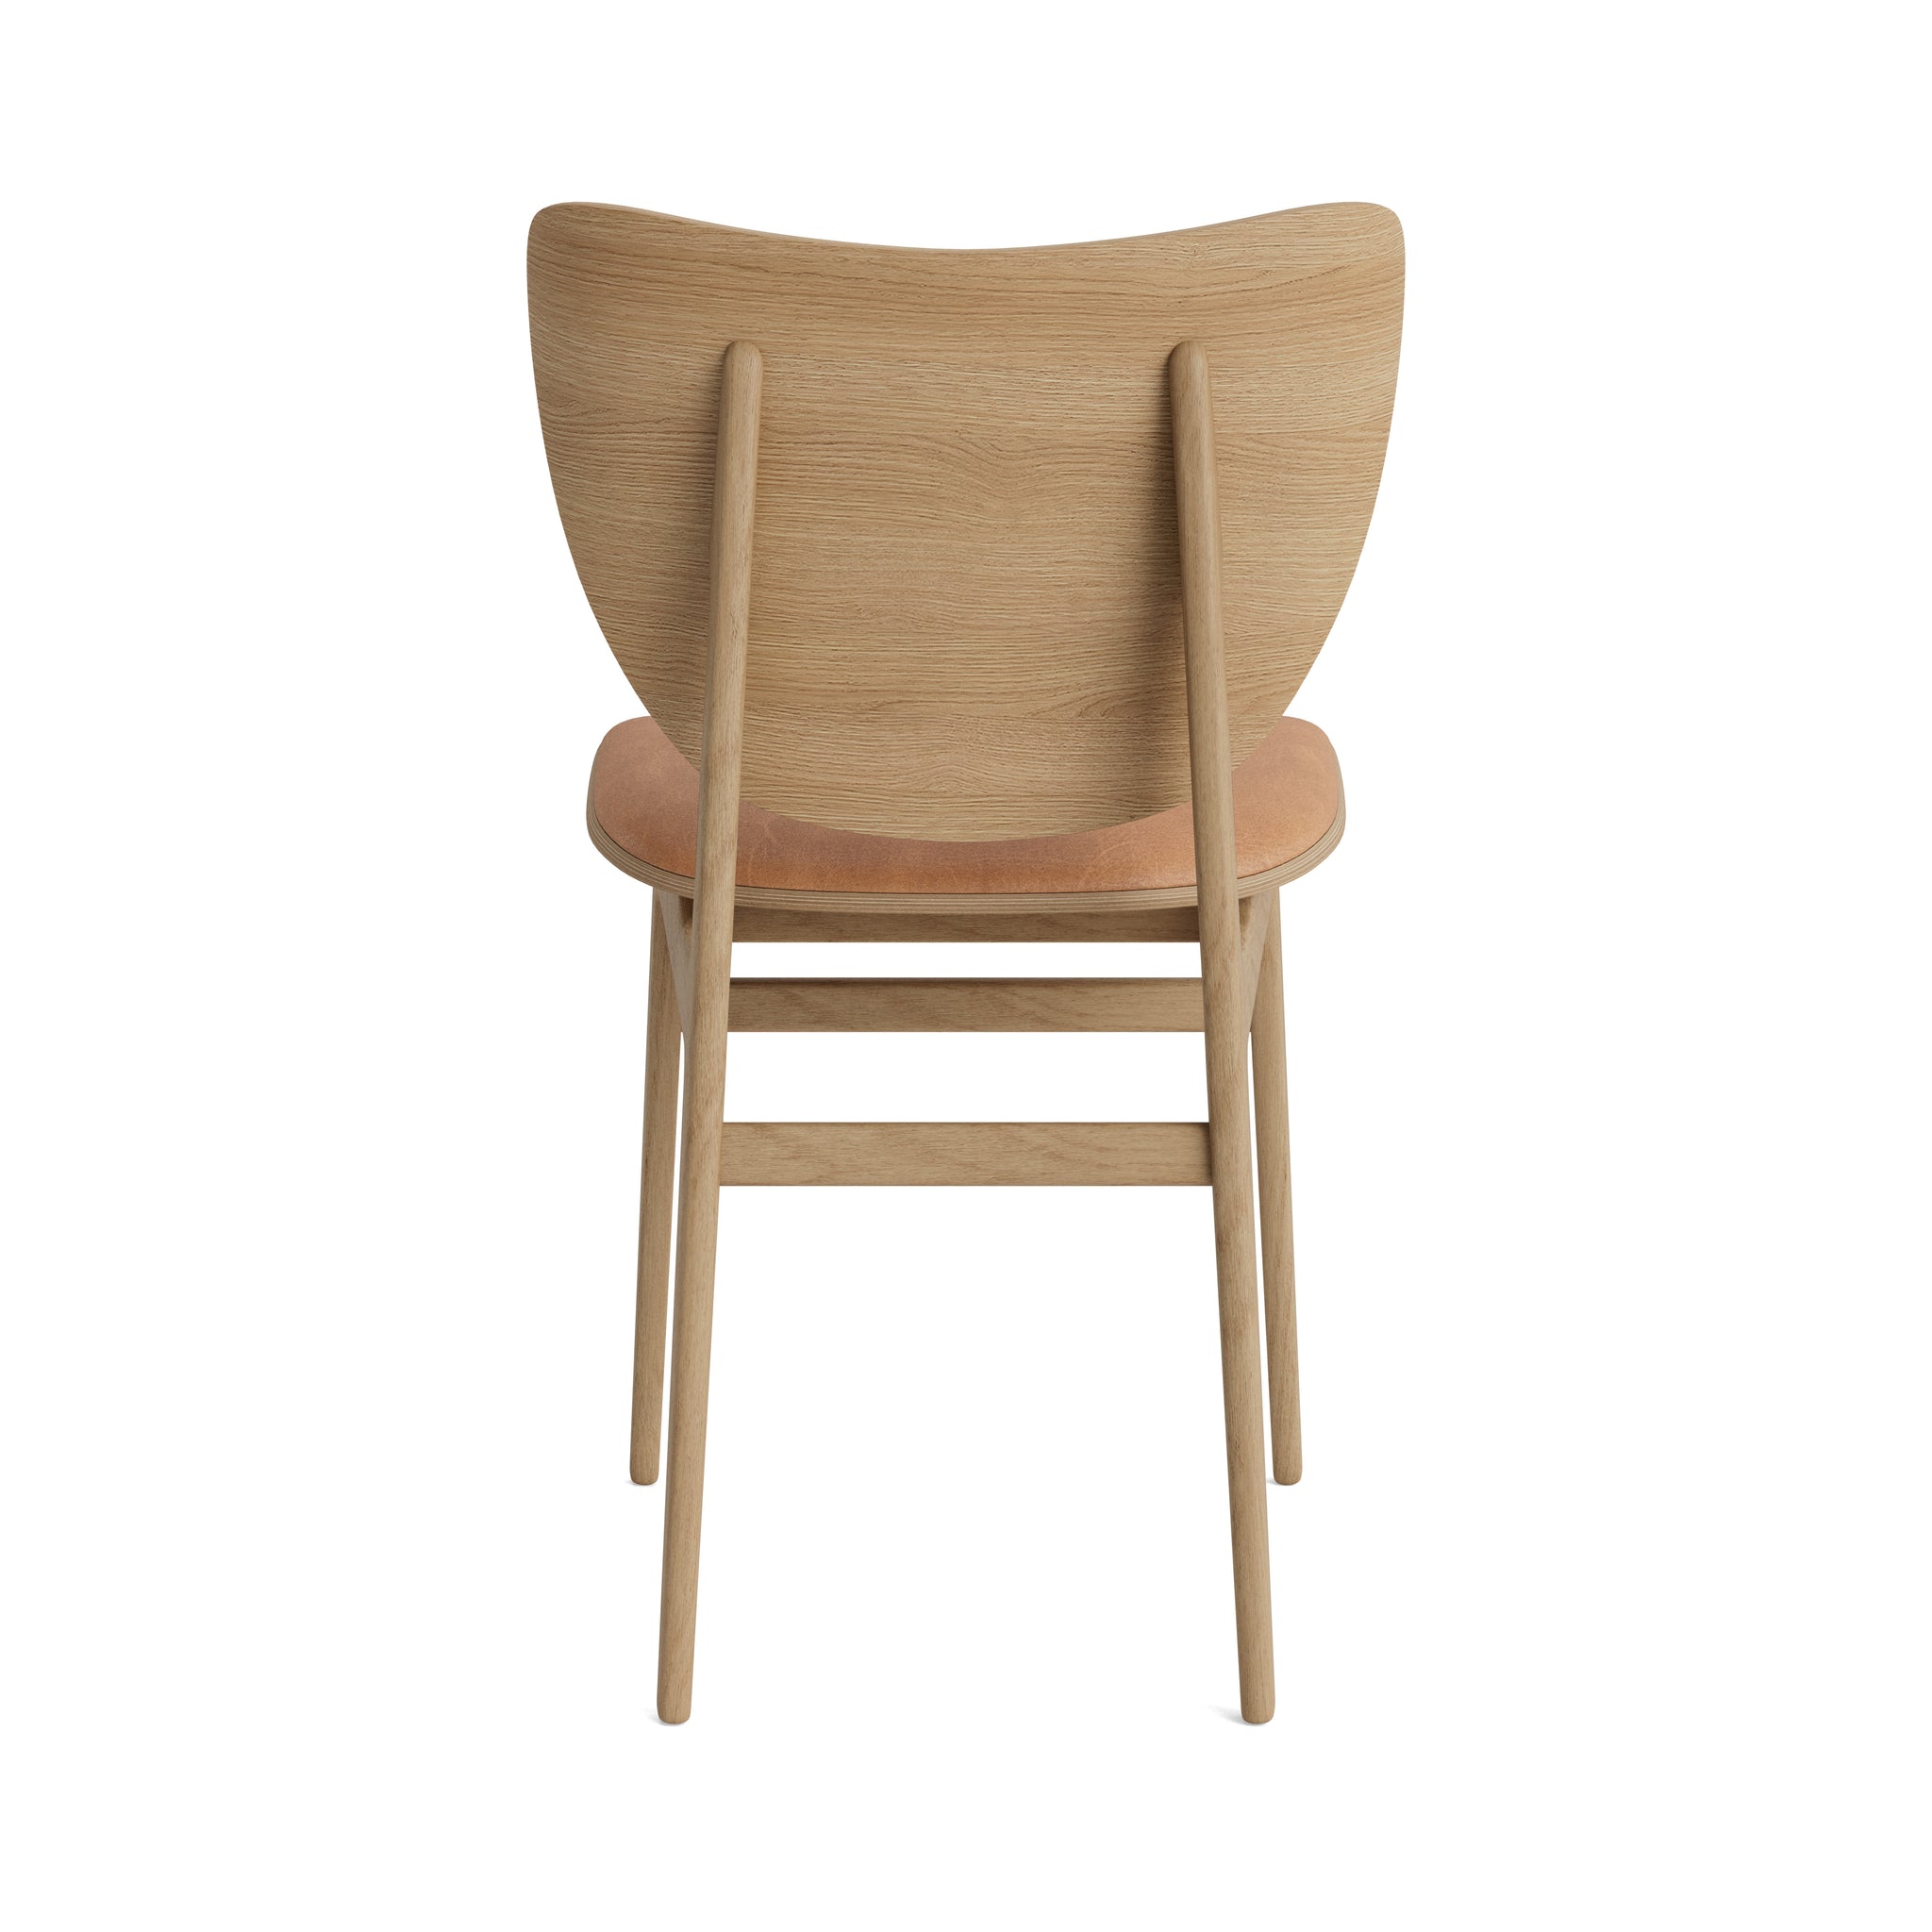 Elephant Chair | Leather Front Upholstery NORR11